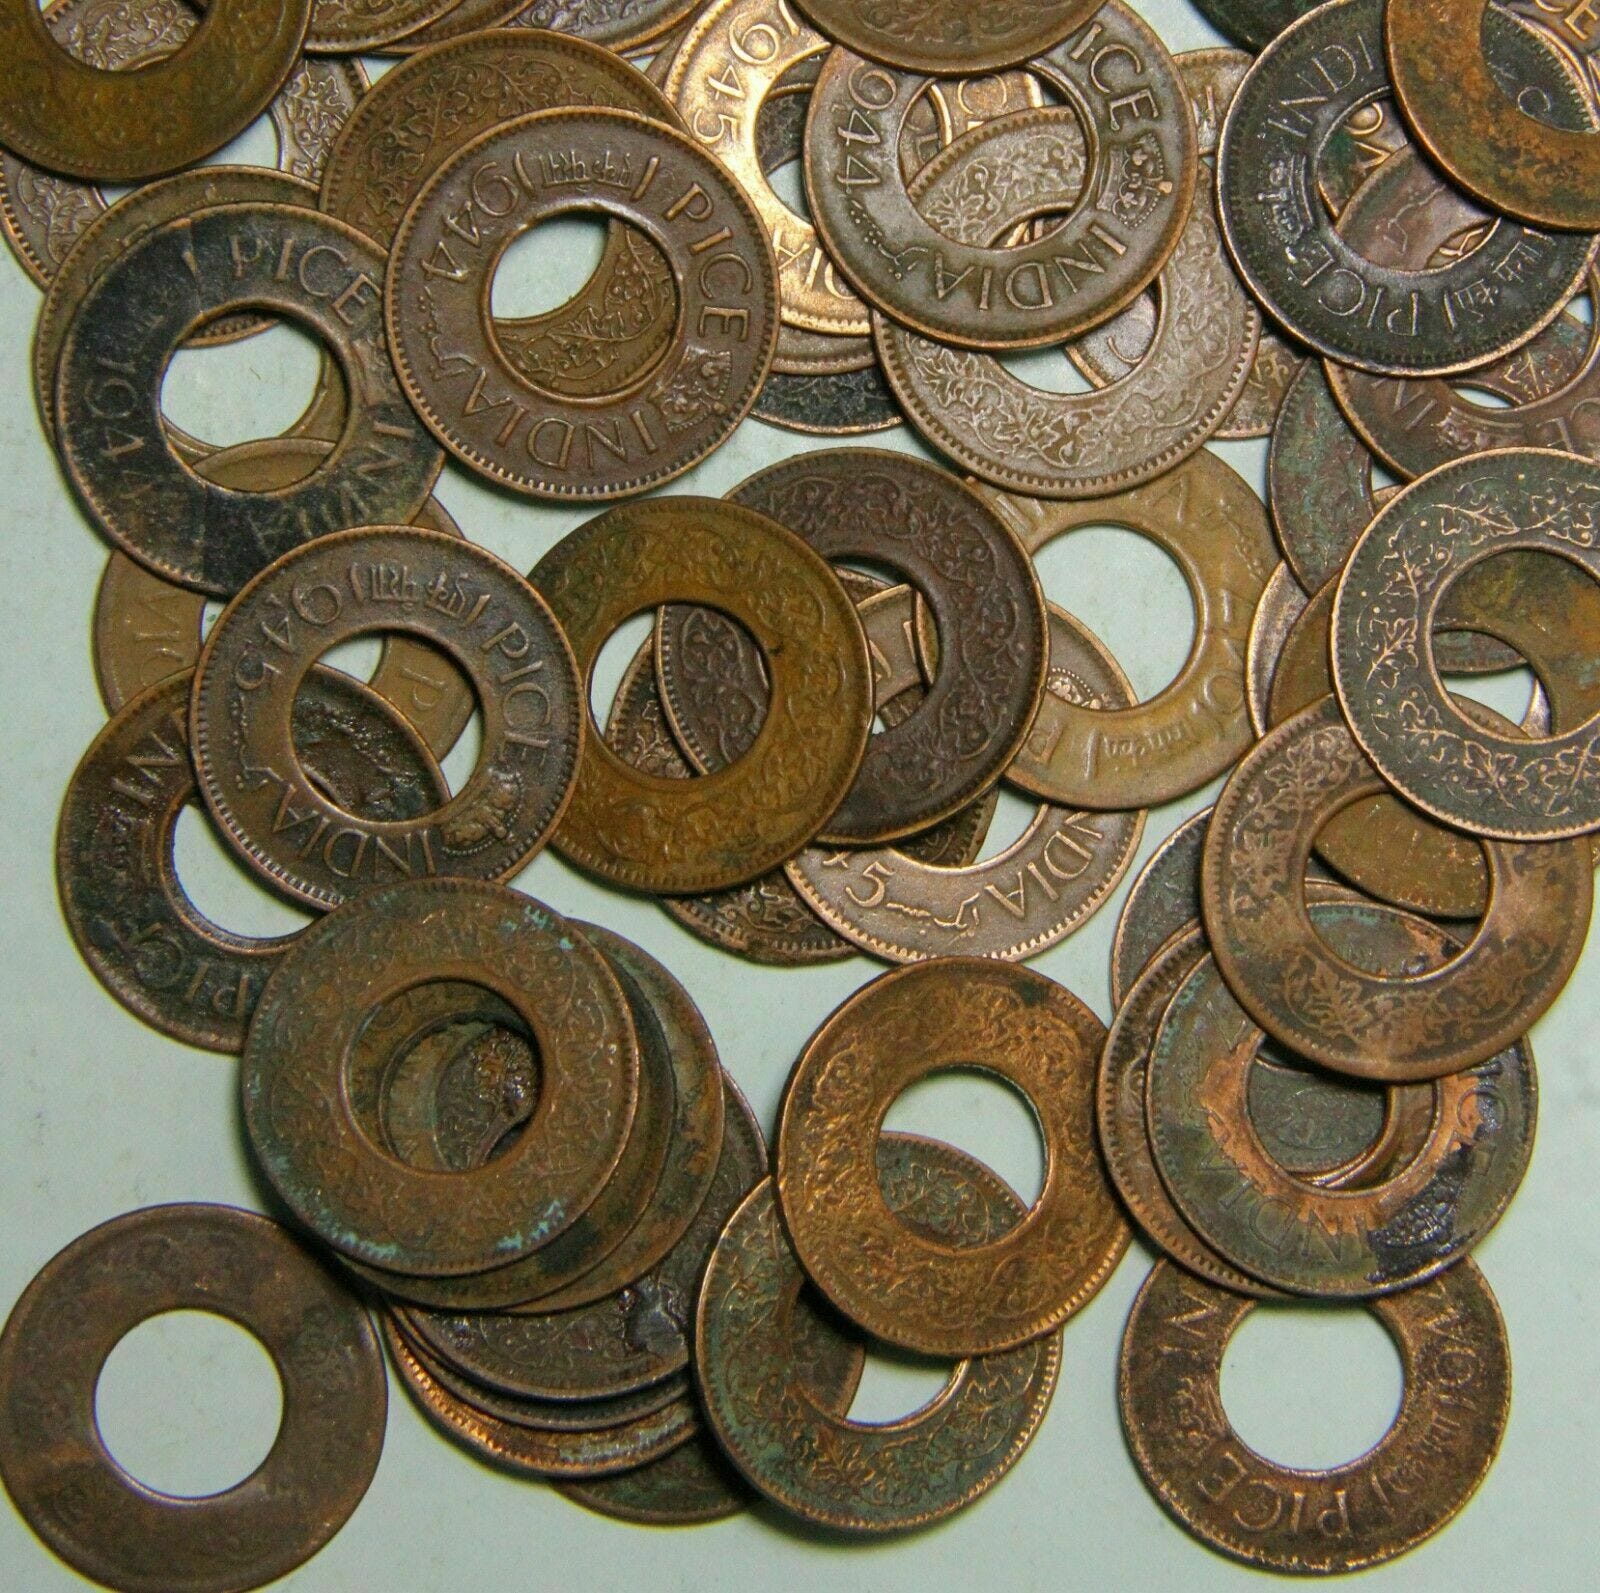 Those Old Coins with Holes in Them? - Brown History